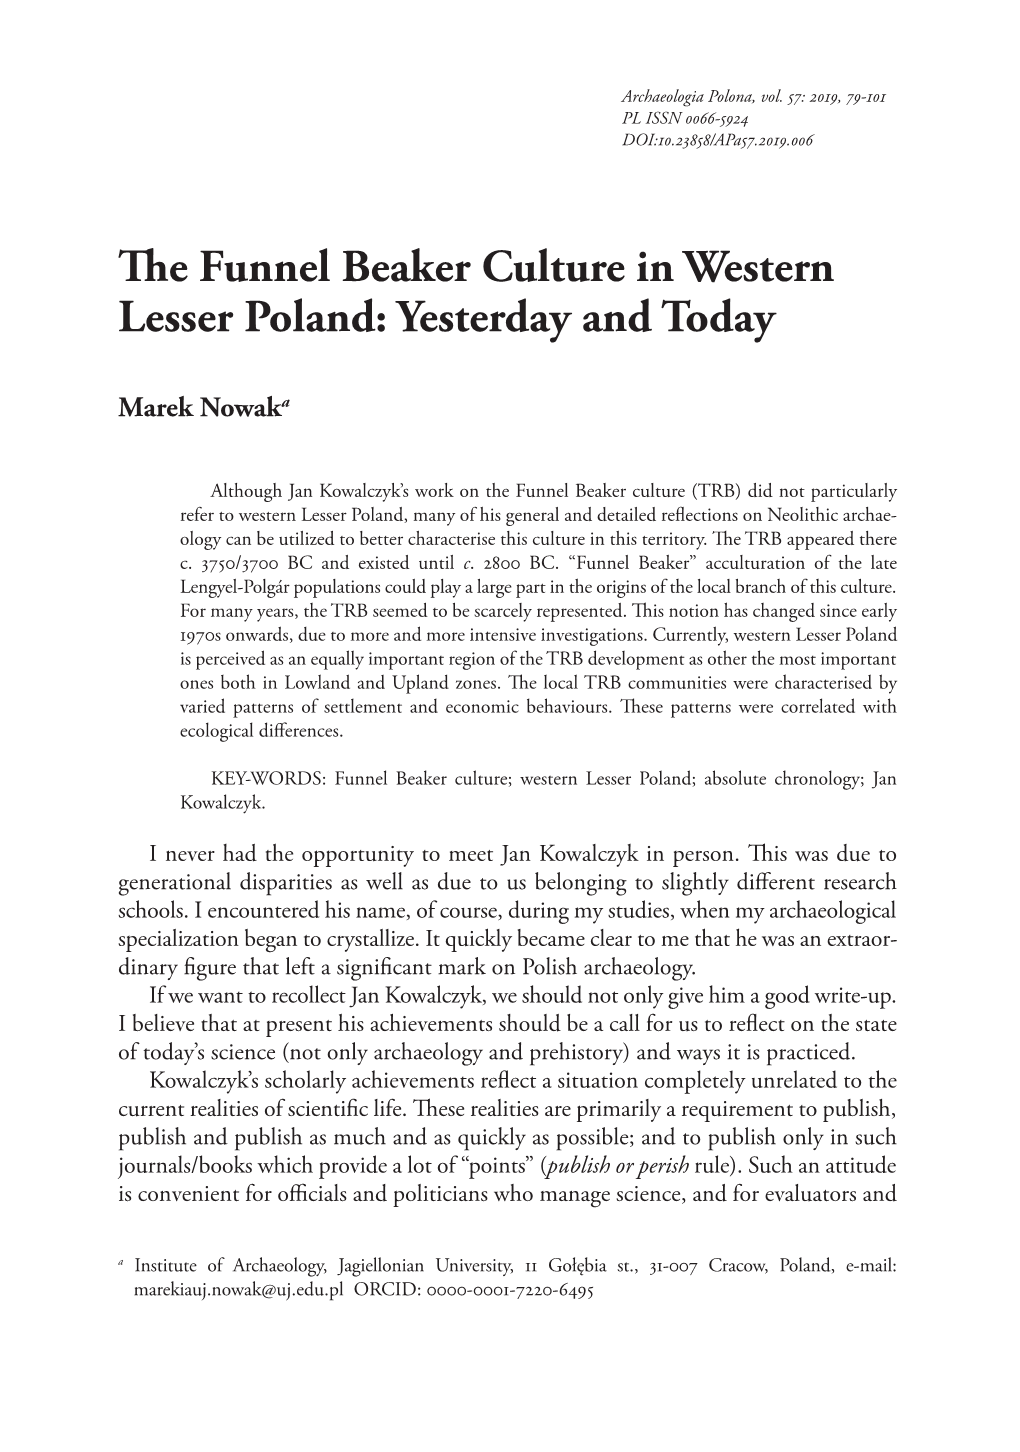 The Funnel Beaker Culture in Western Lesser Poland: Yesterday and Today